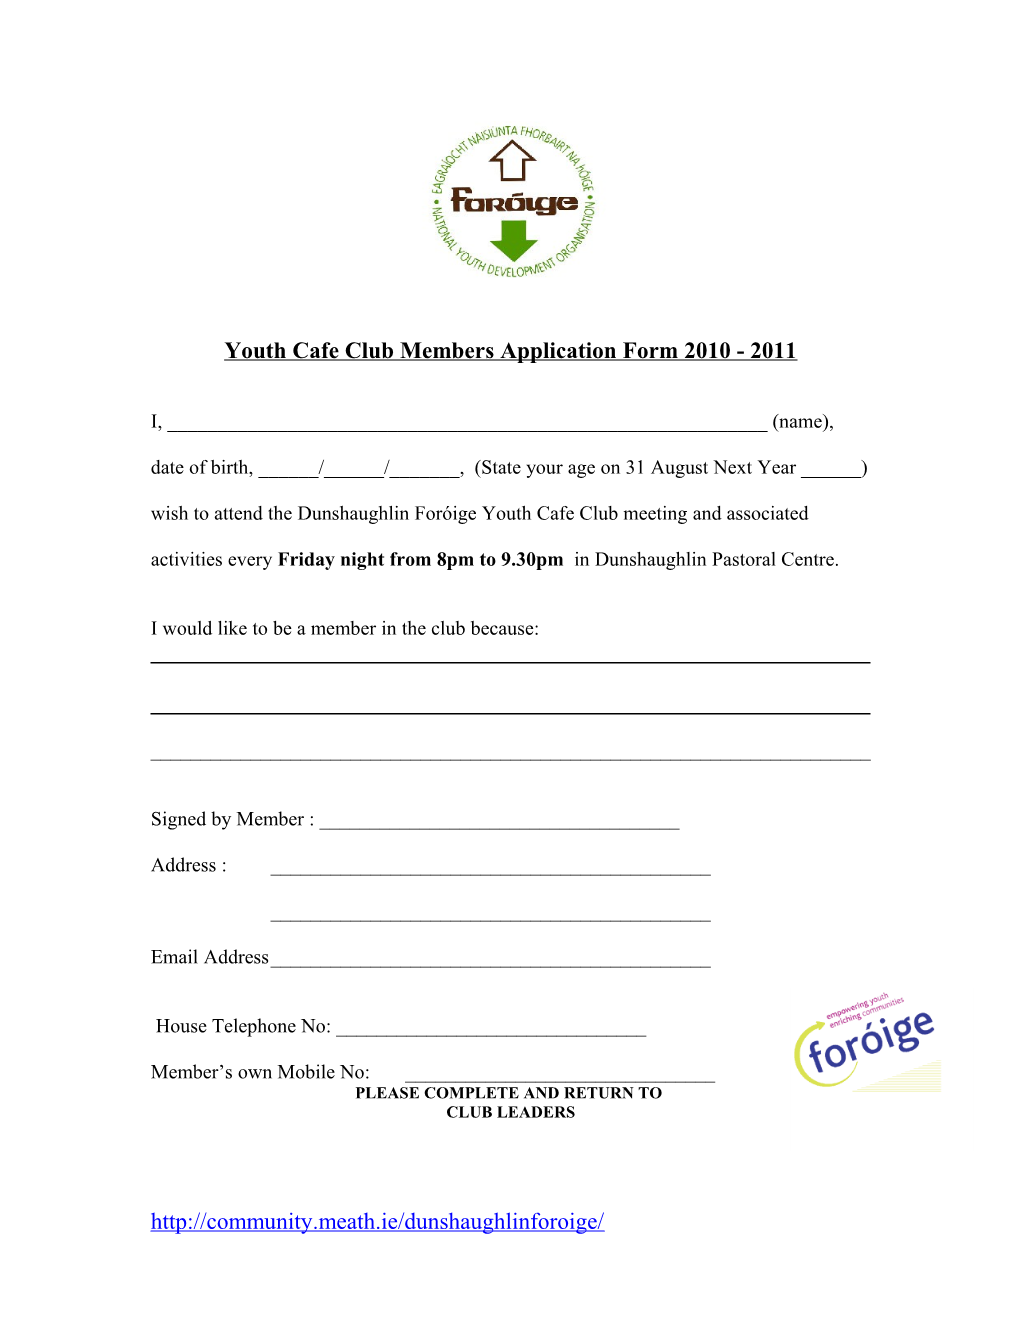 Youth Cafeclubmembers Application Form 2010 - 2011